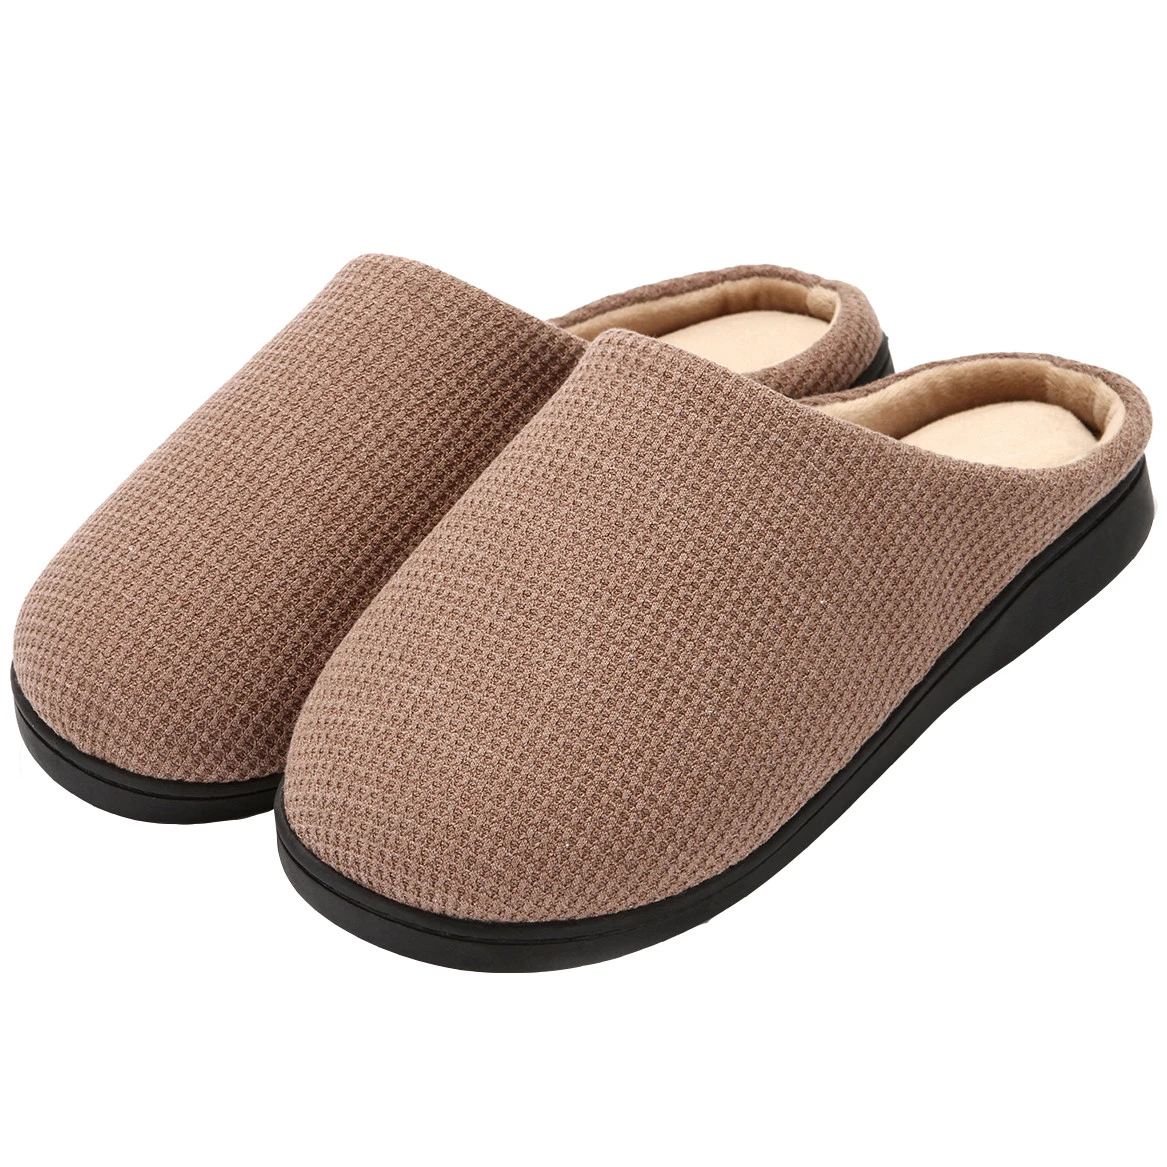 High Quality Memory Foam Two-Tone Coral Fleece Lined Clog Scuff House Shoes Indoor & Outdoor Winter Shoes Women Men Slippers